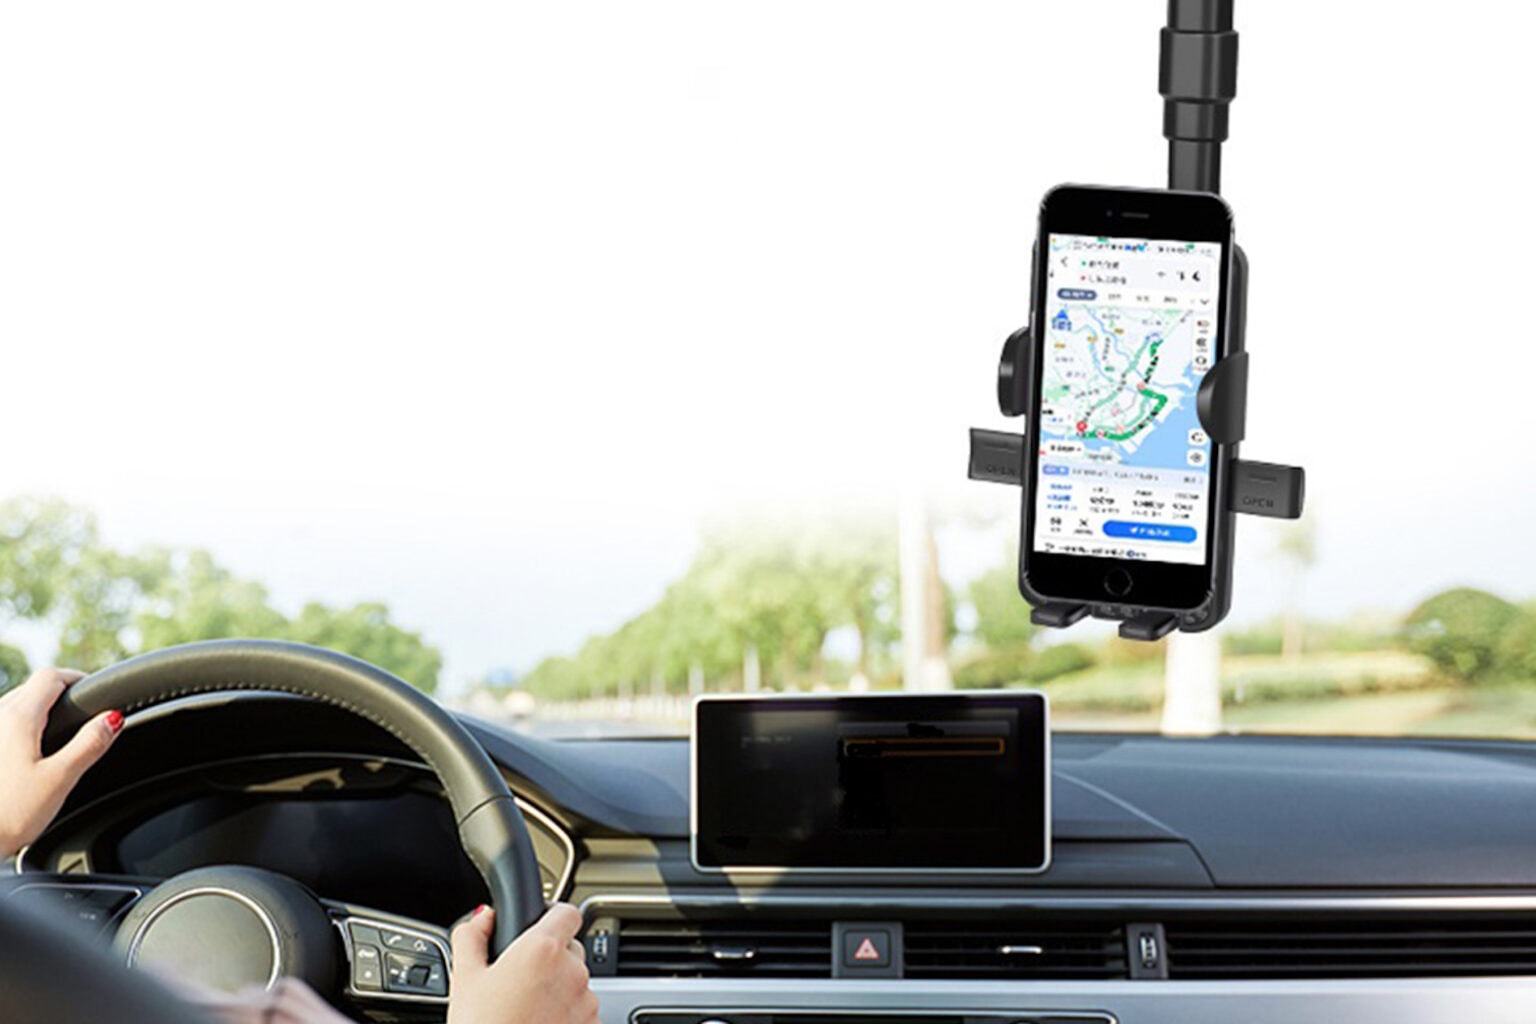 Let your iPhone ride shotgun with 63% off this telescoping car mount